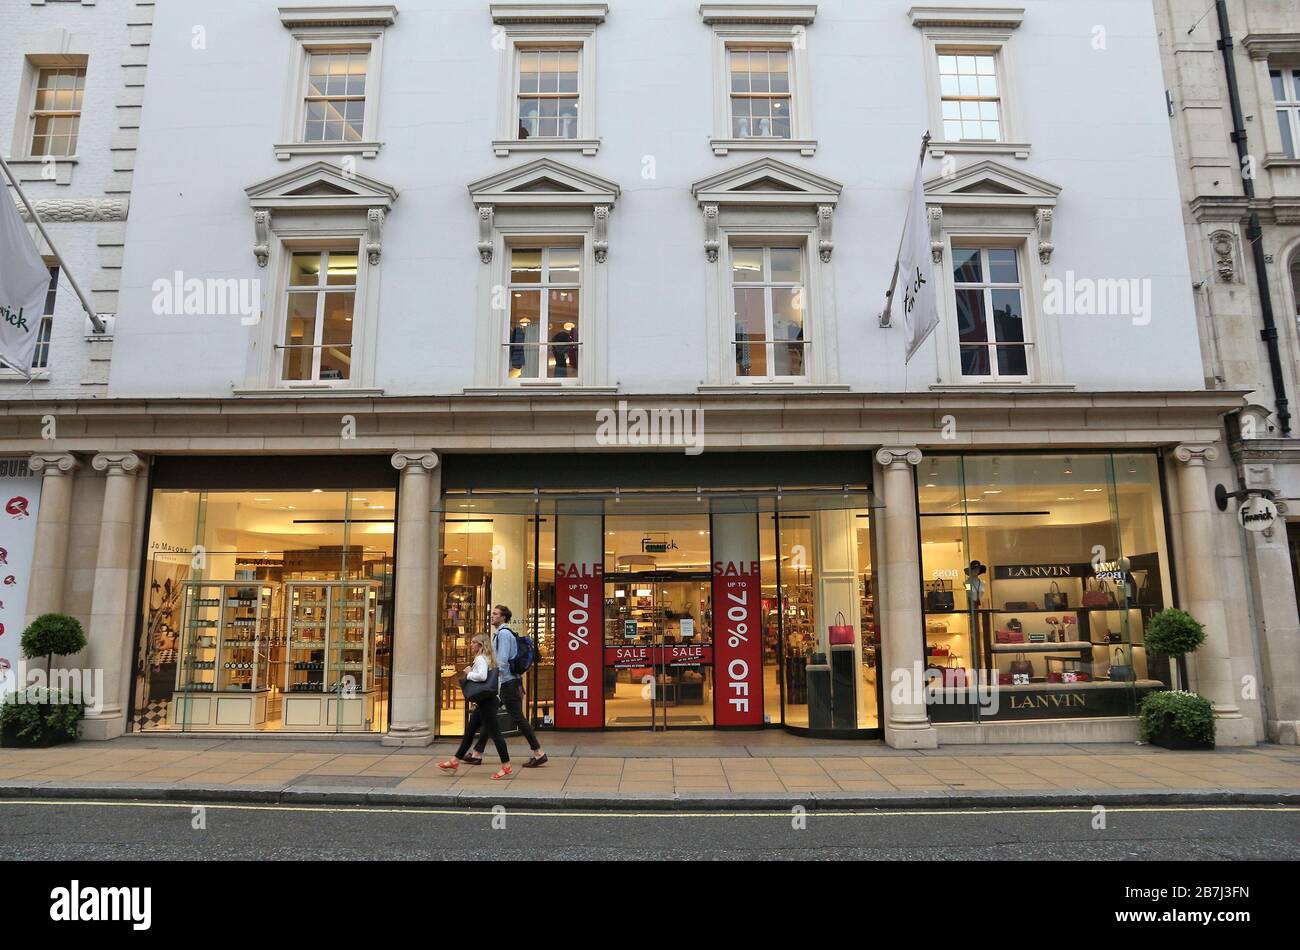 LONDON, UK - JULY 6, 2016: Fenwick department store at Bond Street in London. Bond Street is a major shopping destination of West End in London. Stock Photo